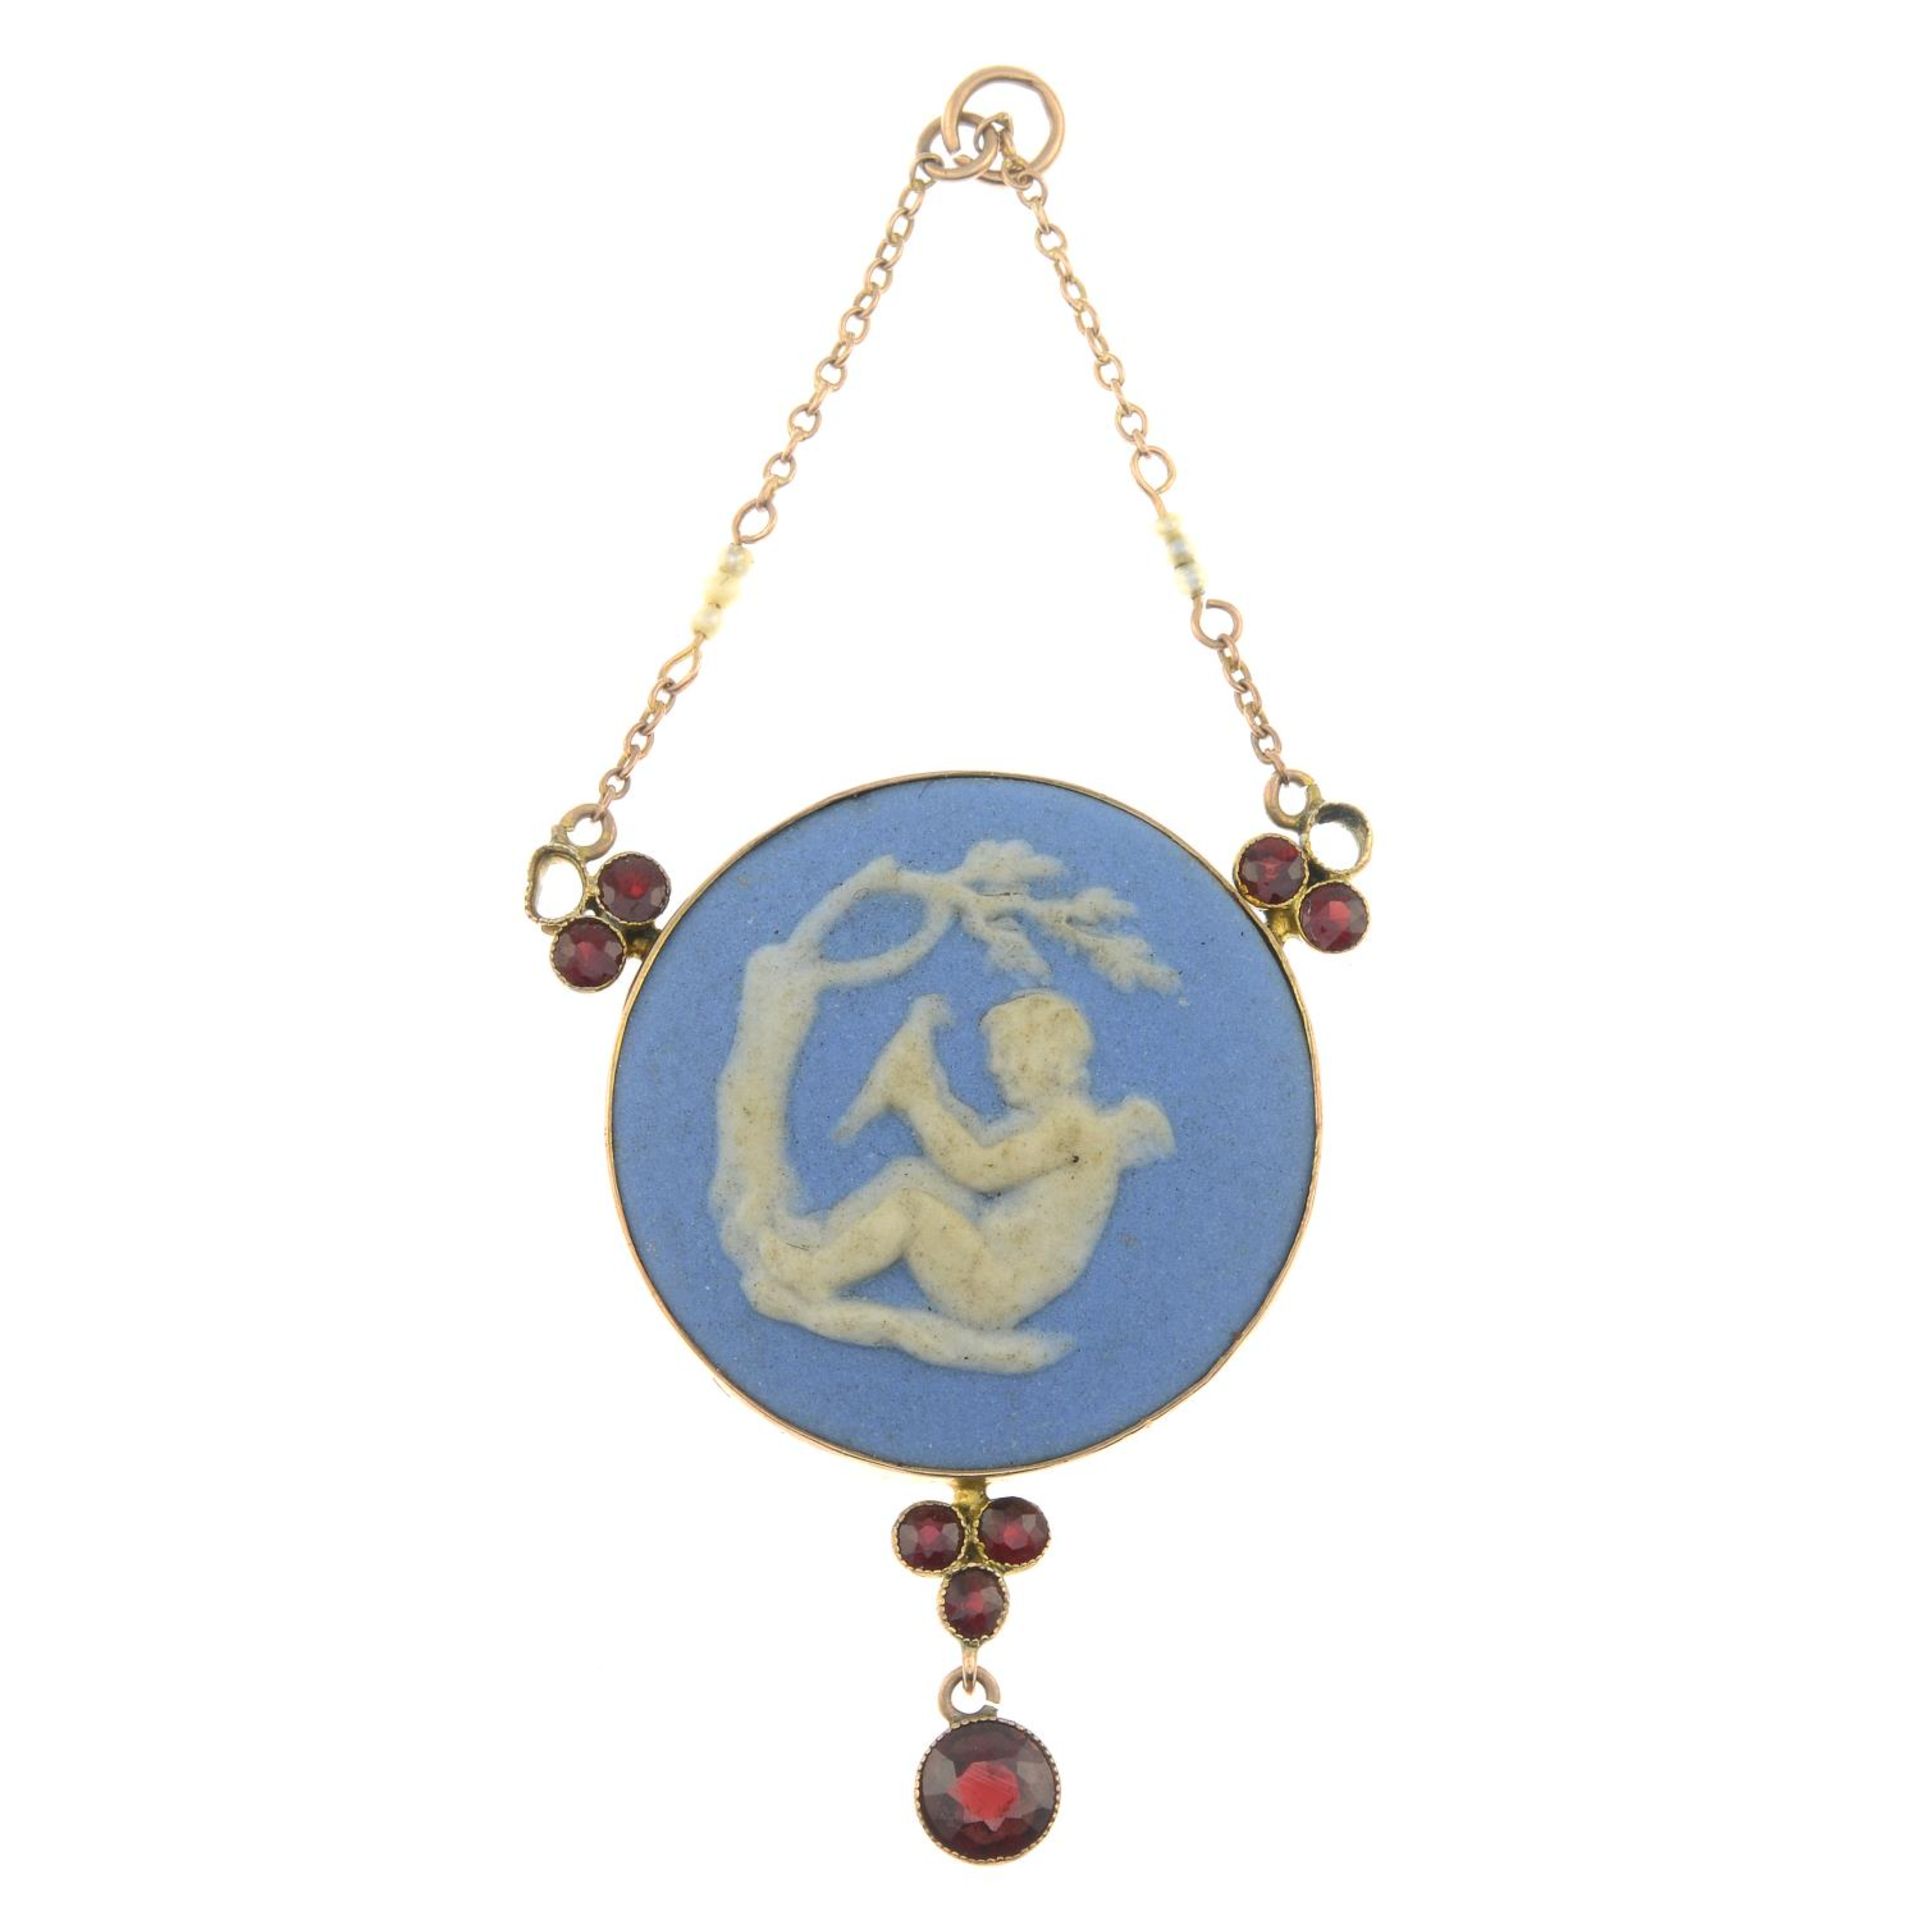 A 9ct gold Wedgwood cameo pendant with garnet and seed pearl detail.Signed Wedgwood.